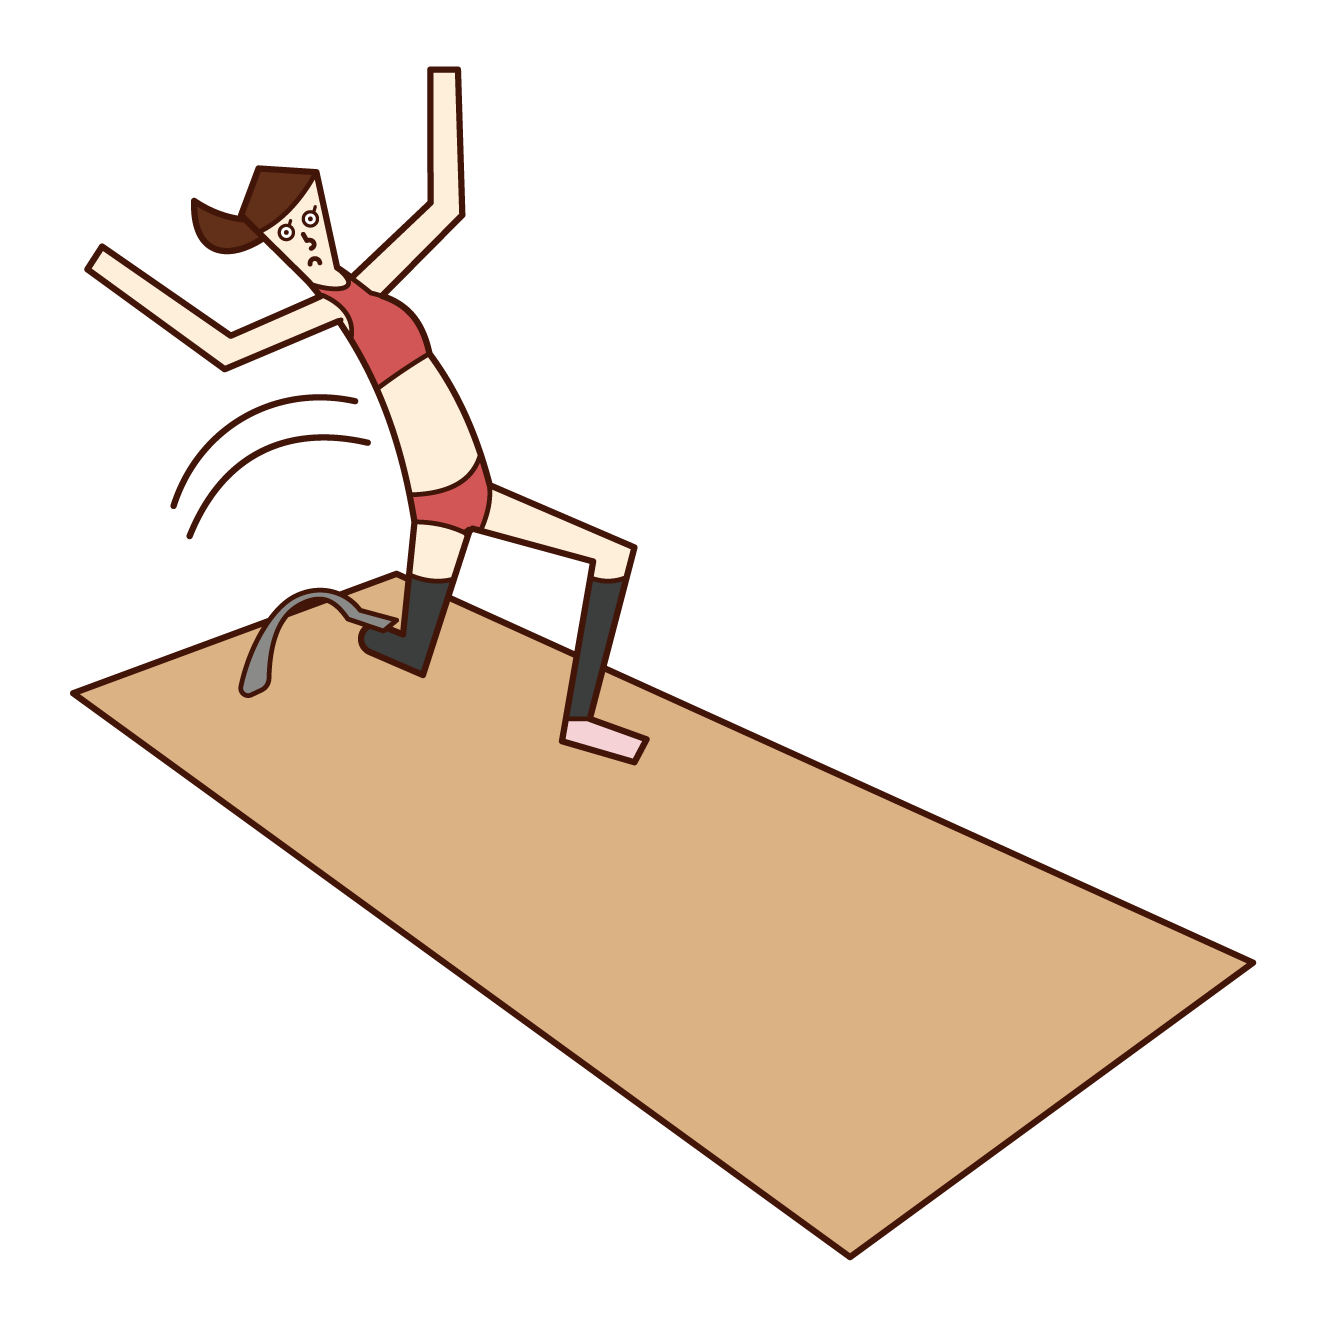 Illustration of a long jump player (man) with a prosthetic leg